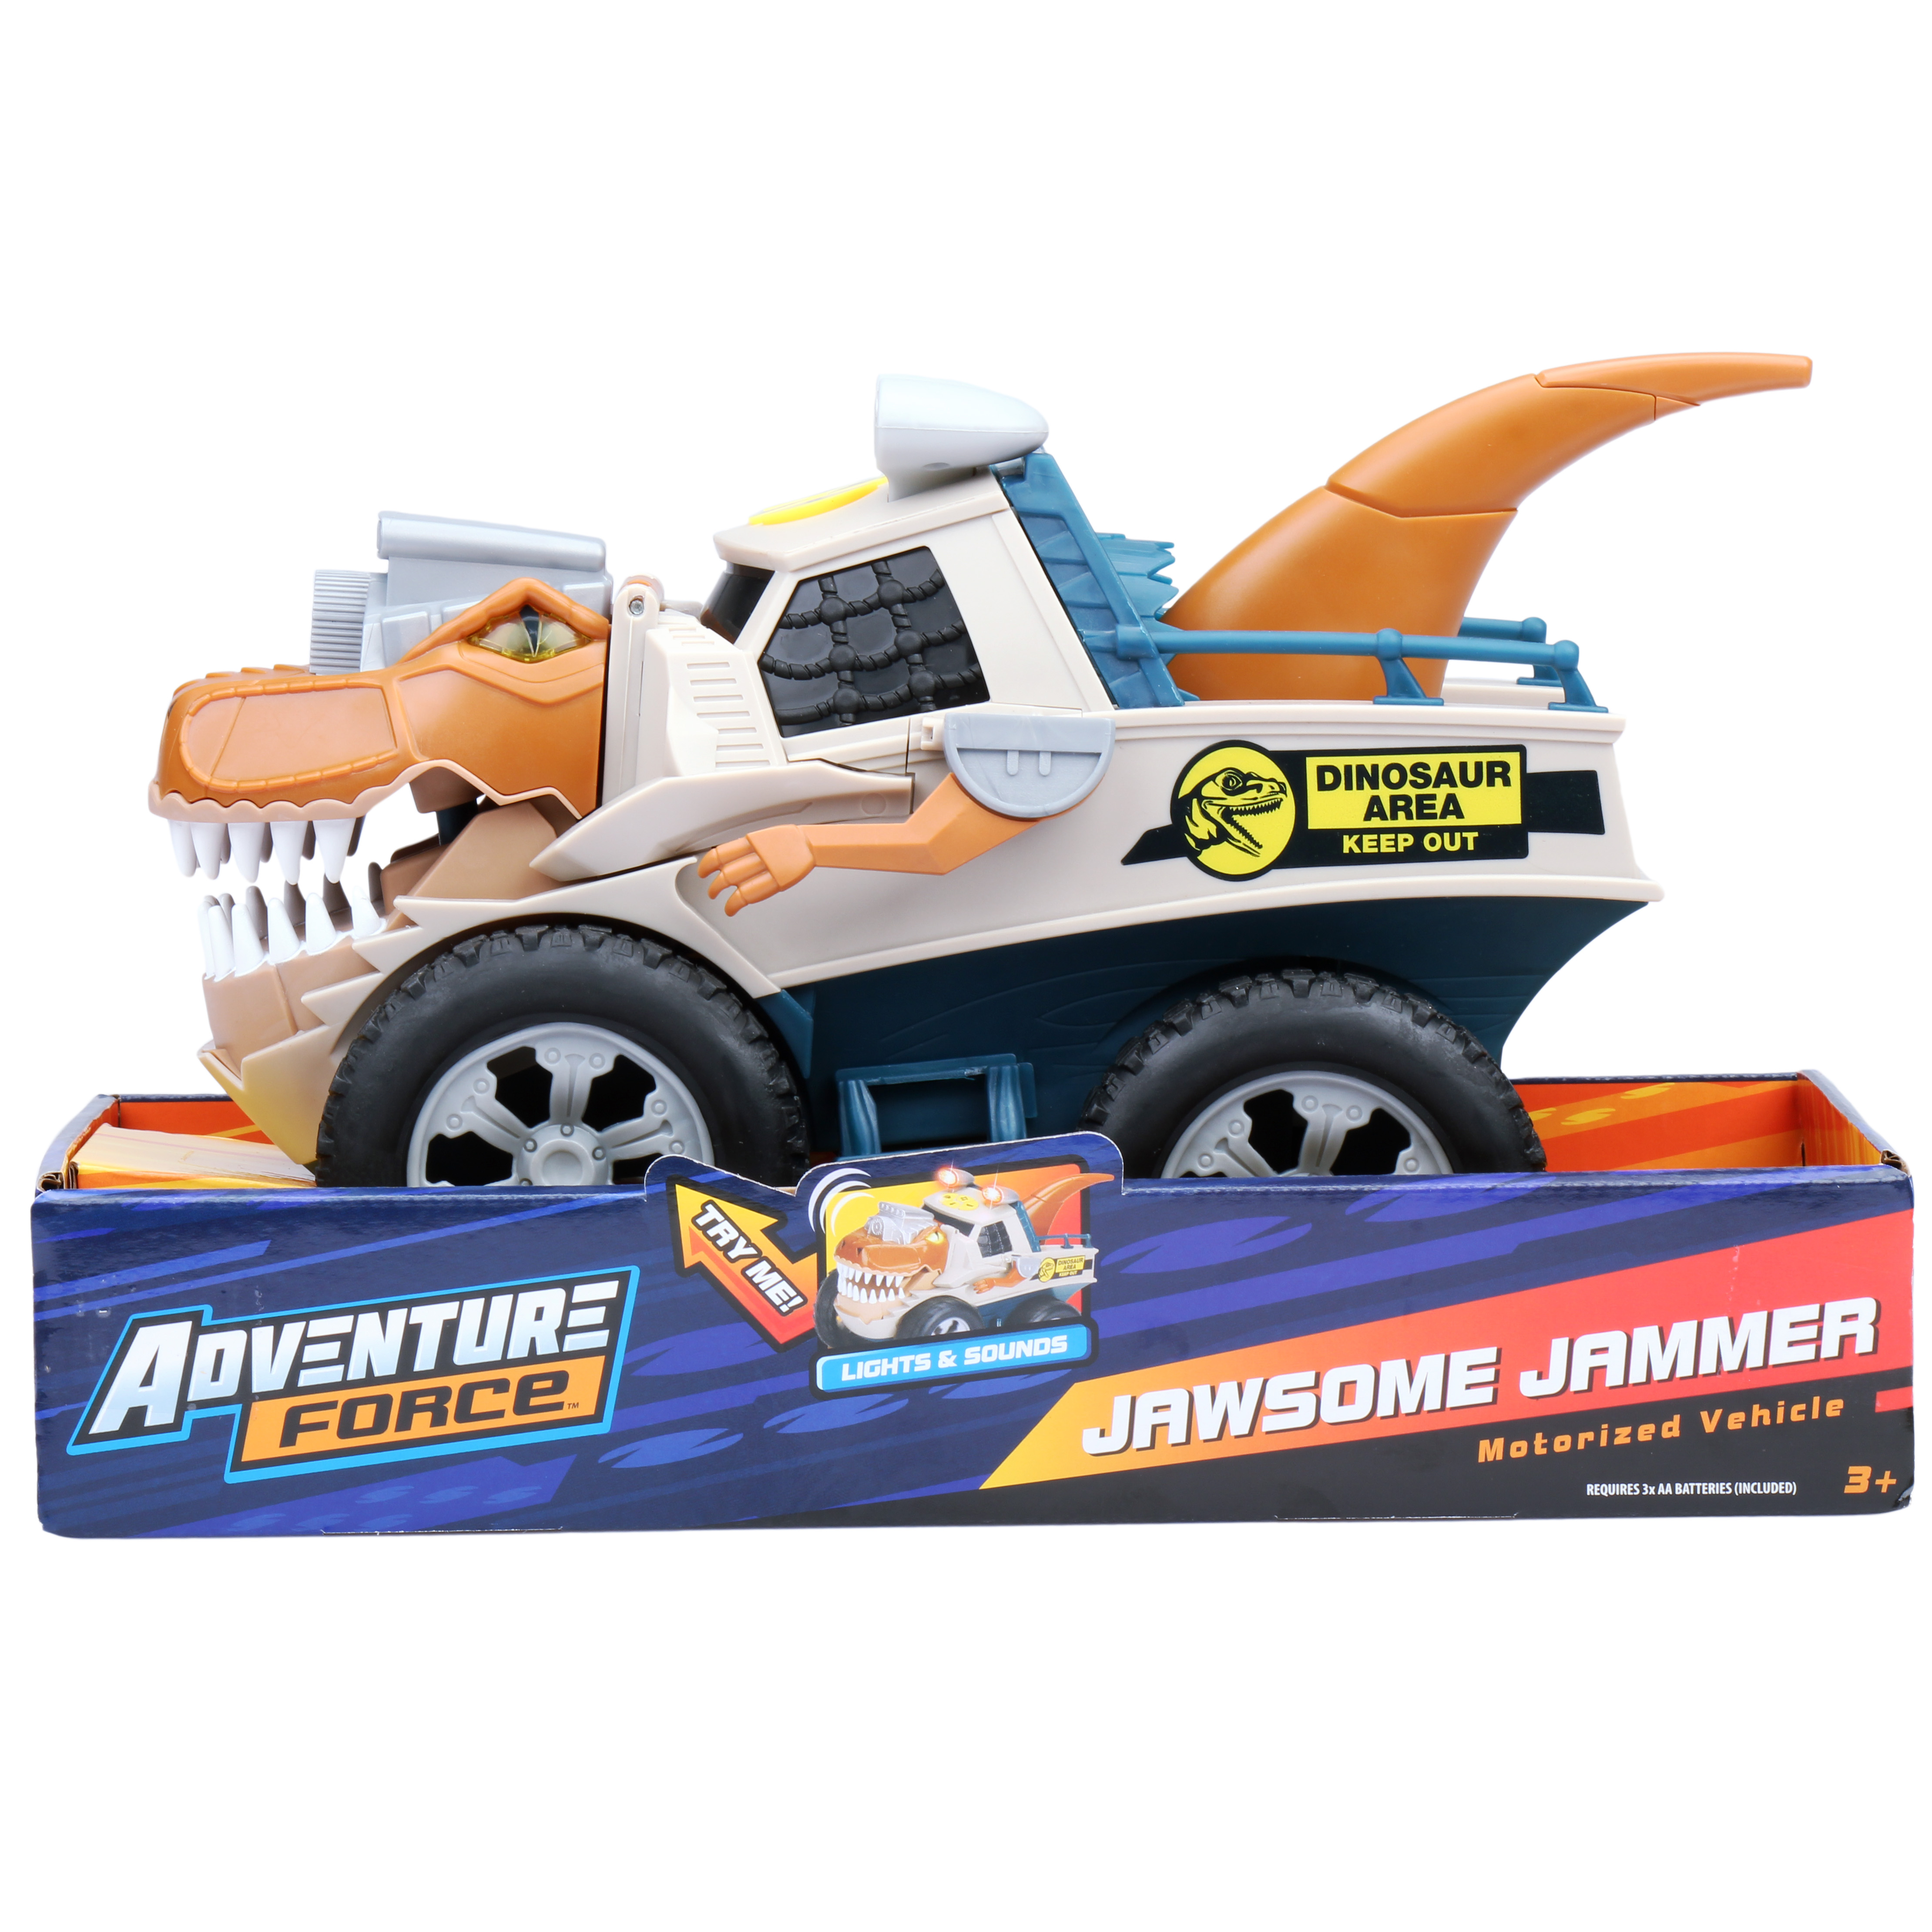 Adventure Force Jawesome Jammer Motorized Lights & Sounds Brown Dino Vehicle - image 3 of 5